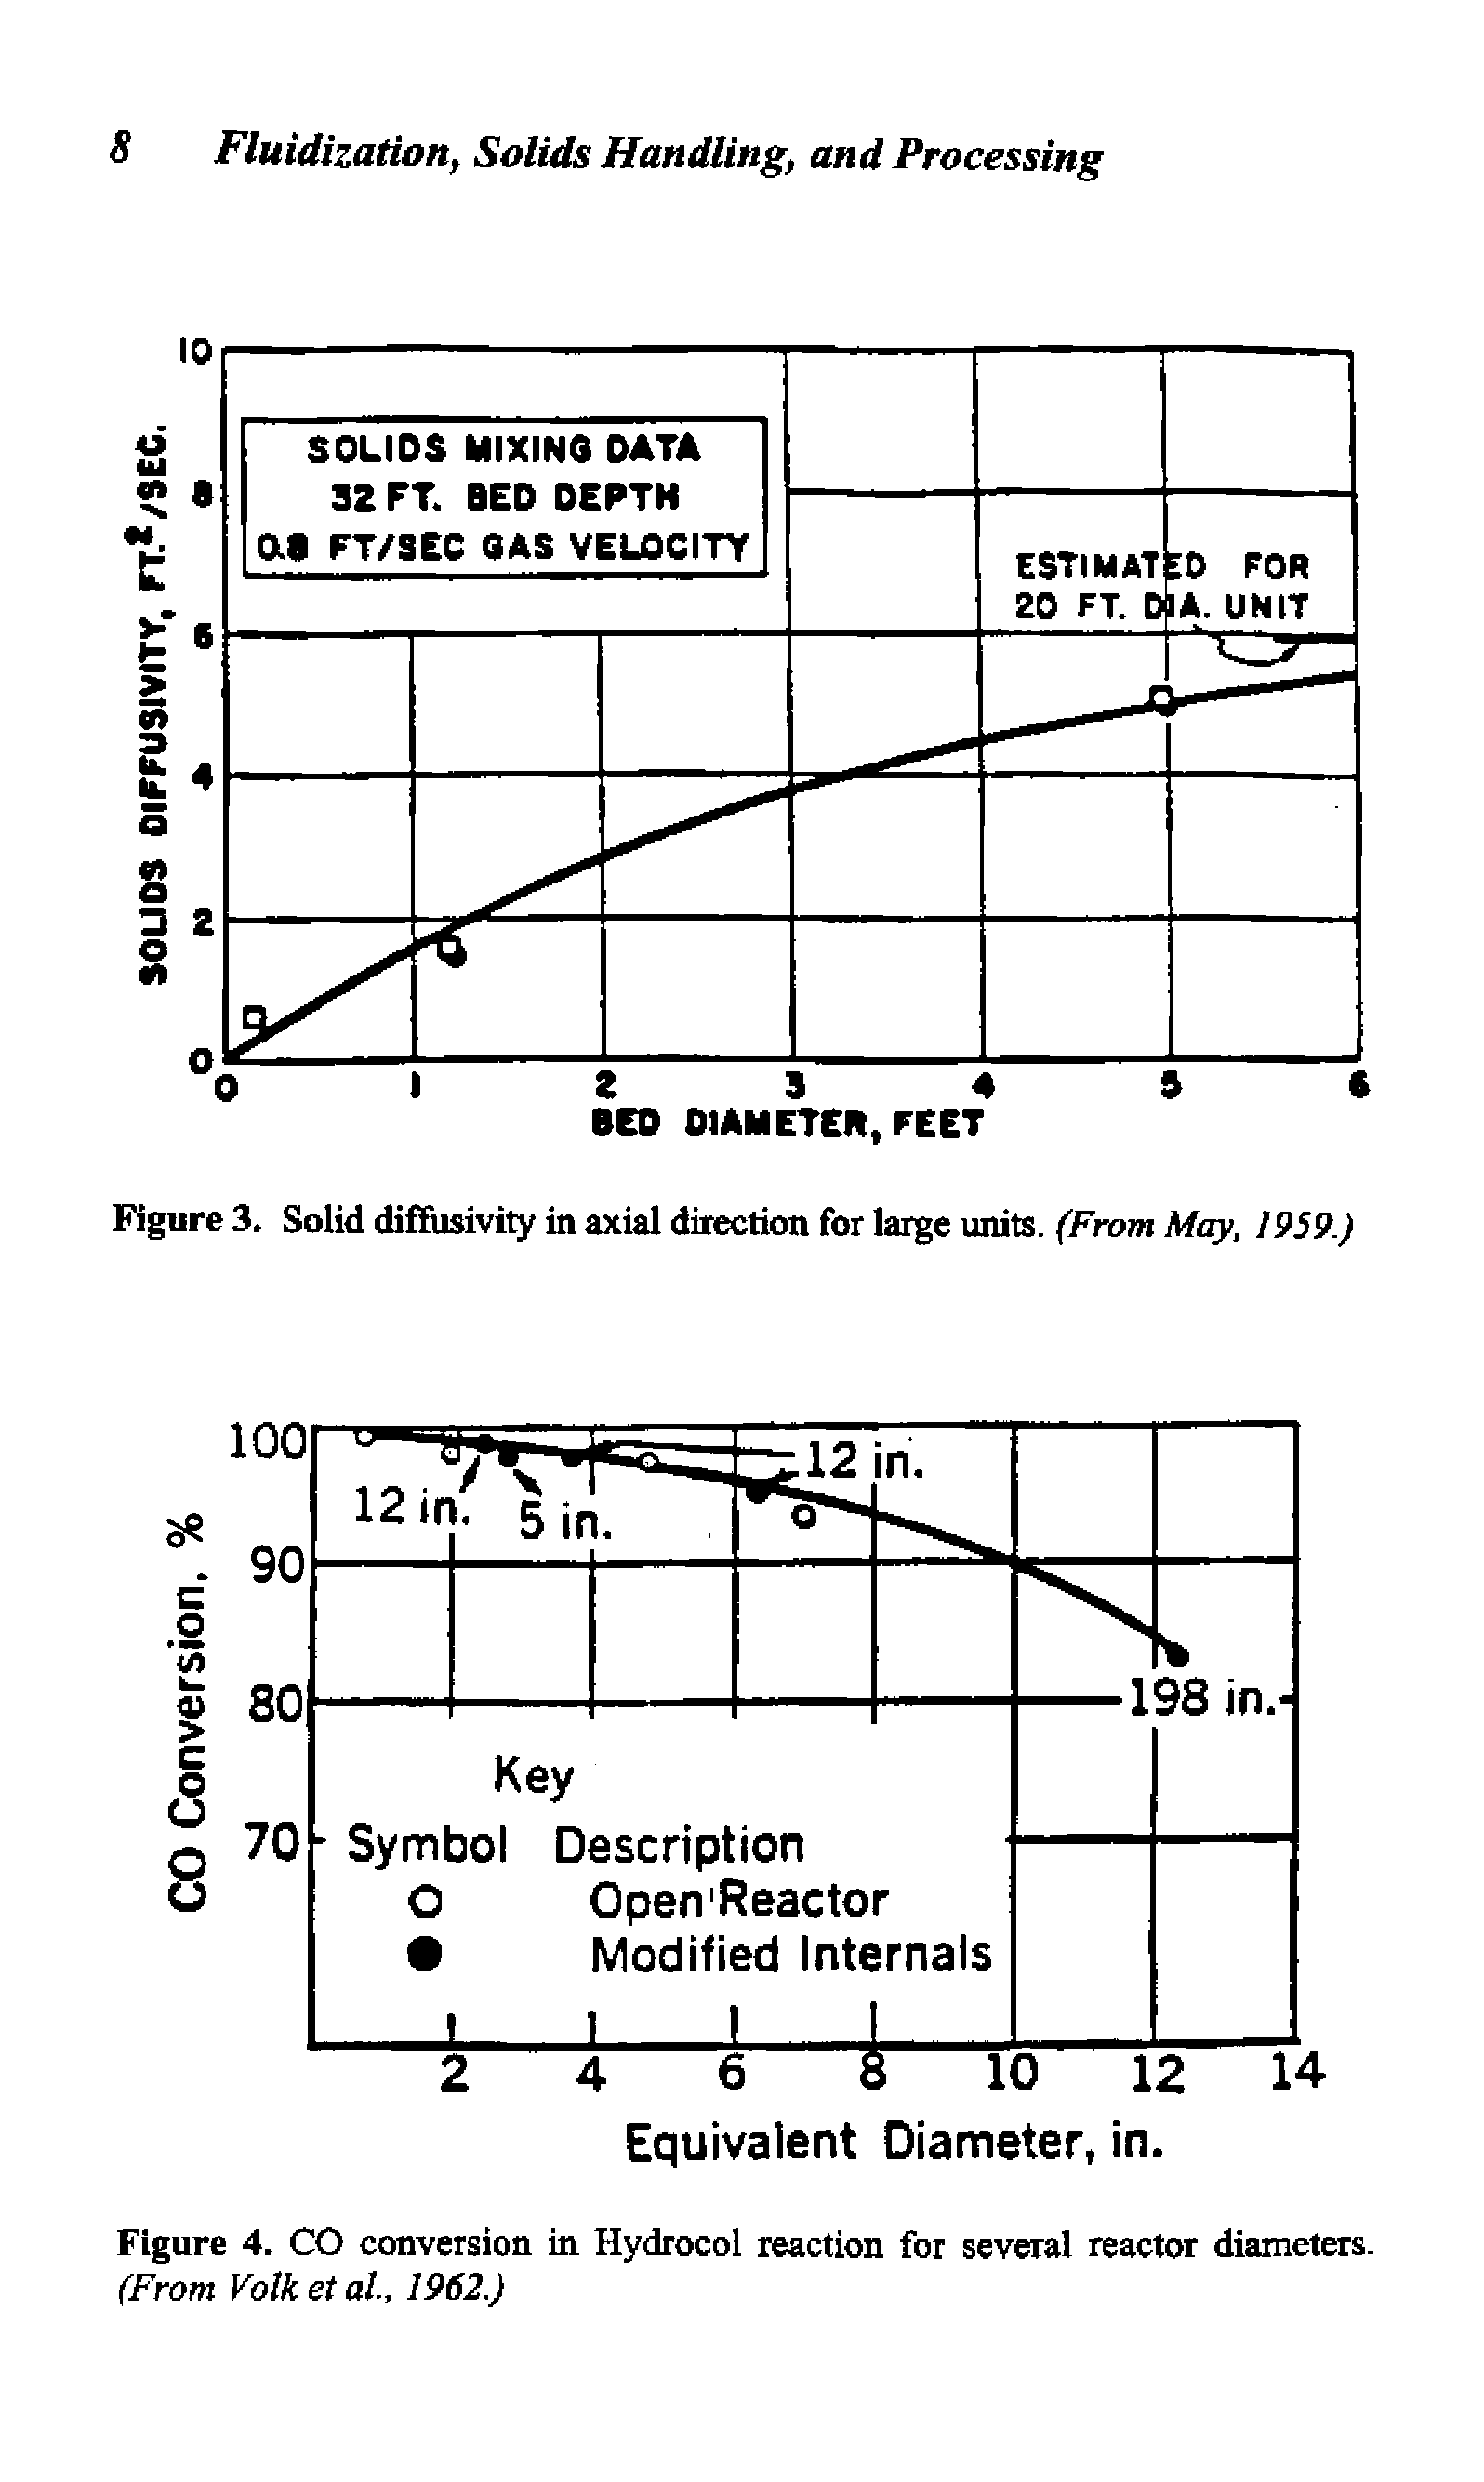 Figure 4. CO conversion in Hydrocol reaction for several reactor diameters. (From Volk et al., 1962.)...